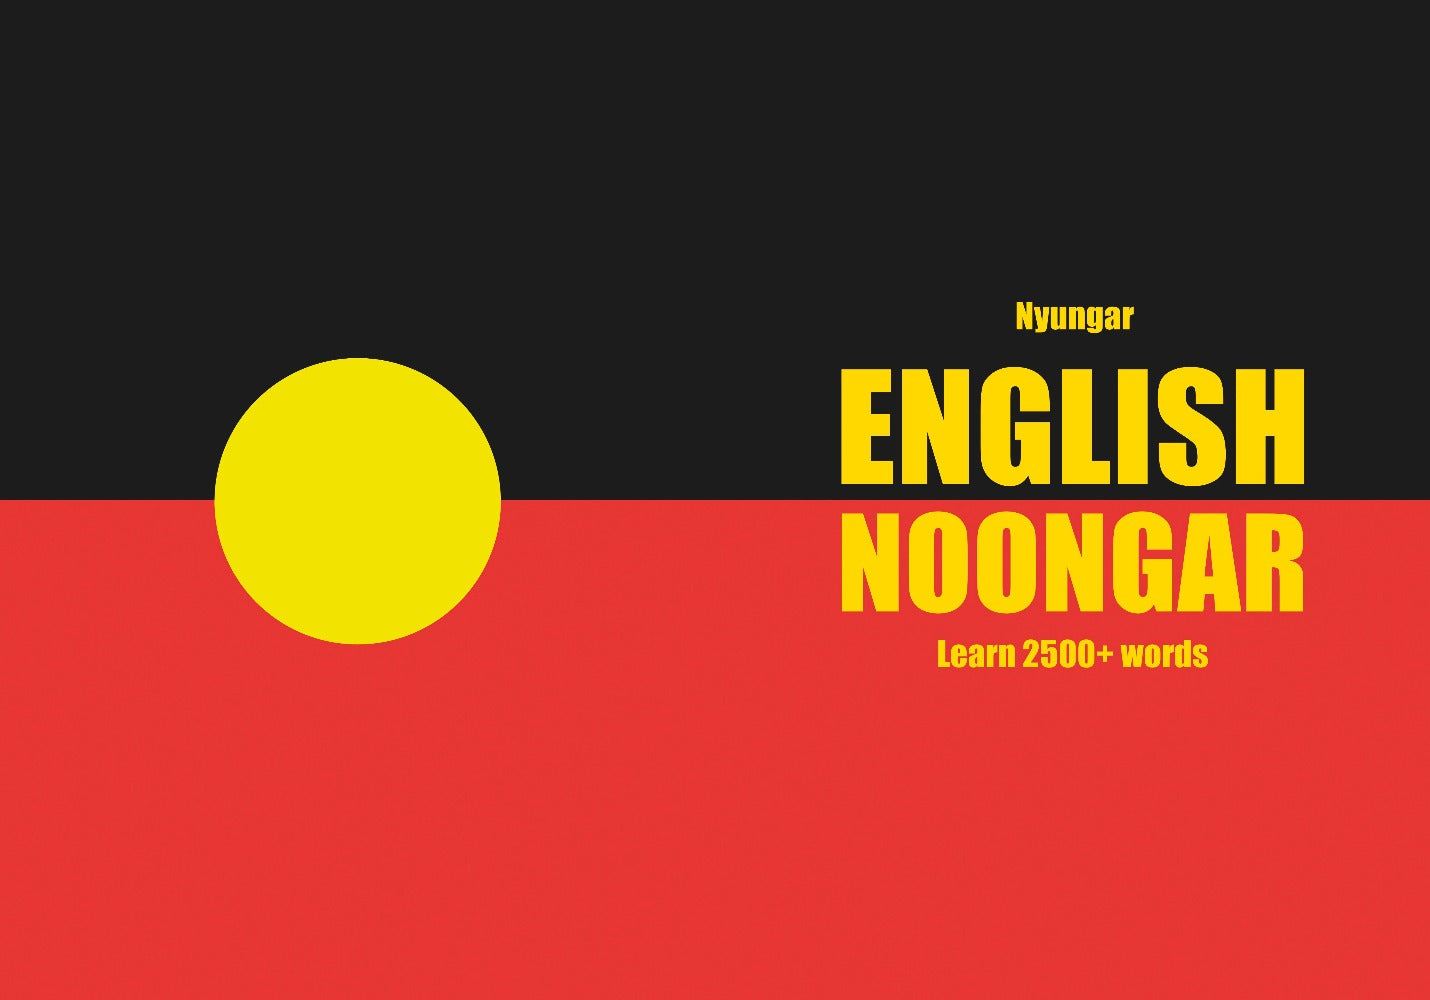 Noongar notebook cover